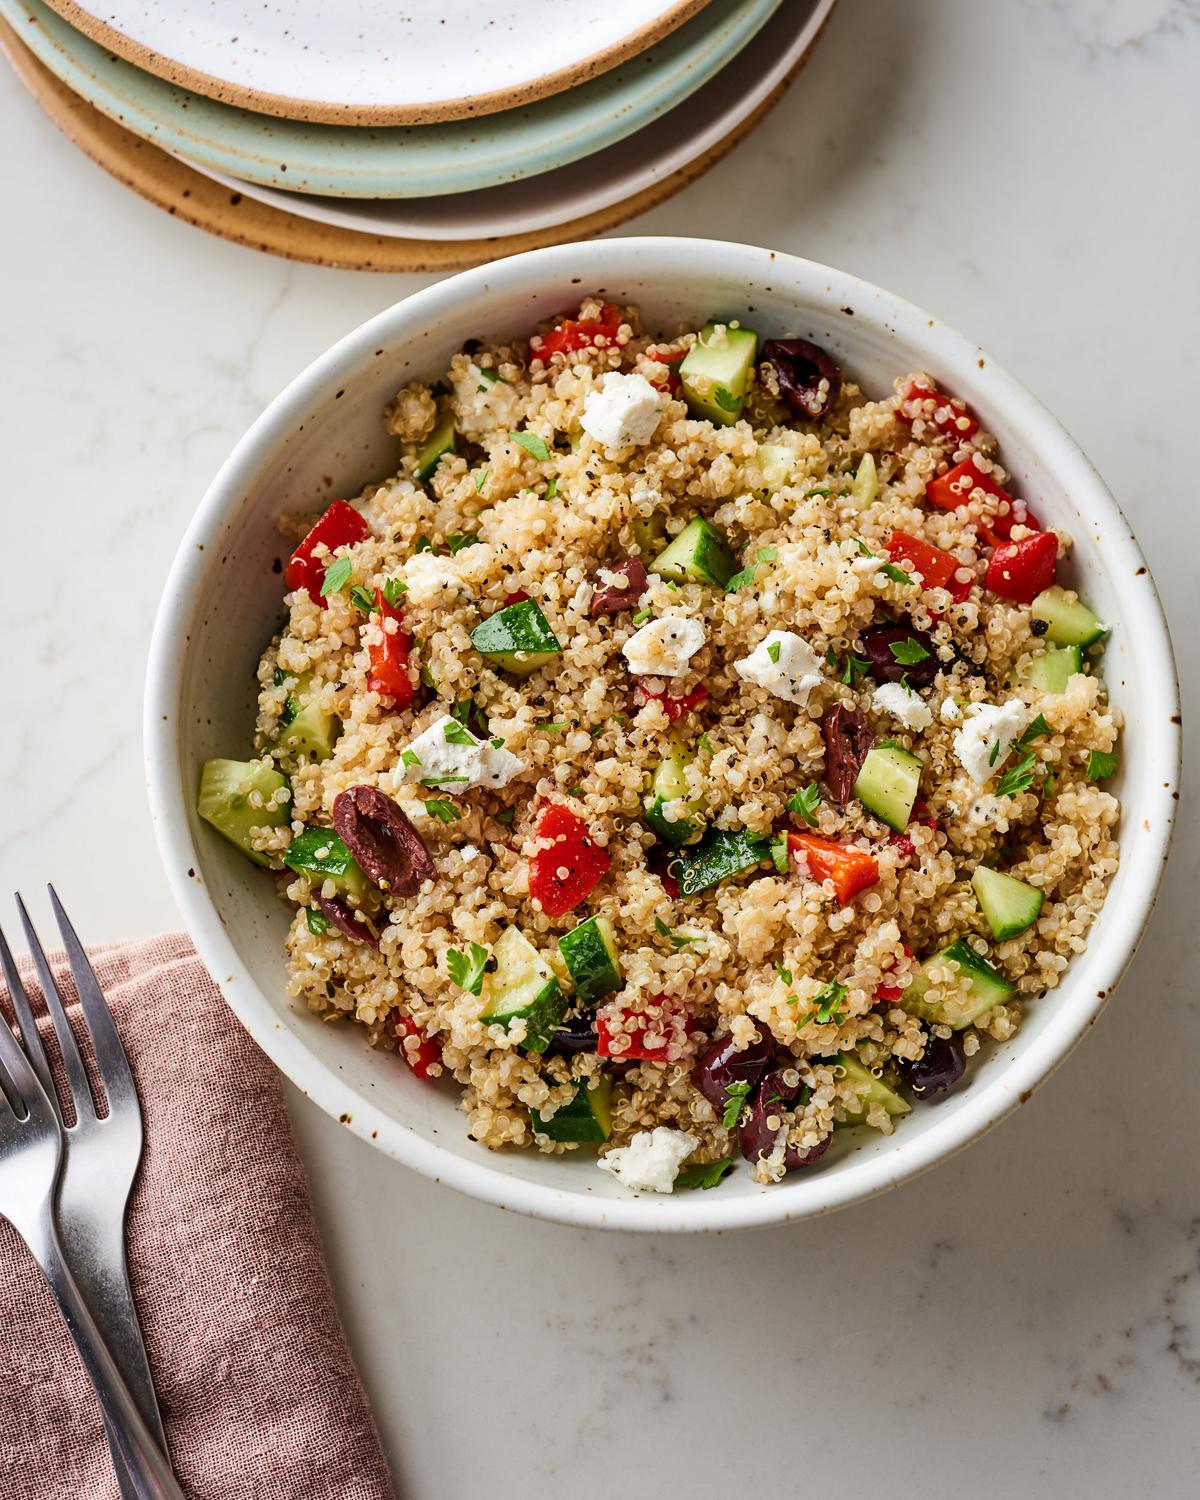 This colorful quinoa salad holds up well in the fridge, is perfectly packable, and has enough protein and other good things to keep you satisfied. (Joe Lingeman/TNS)